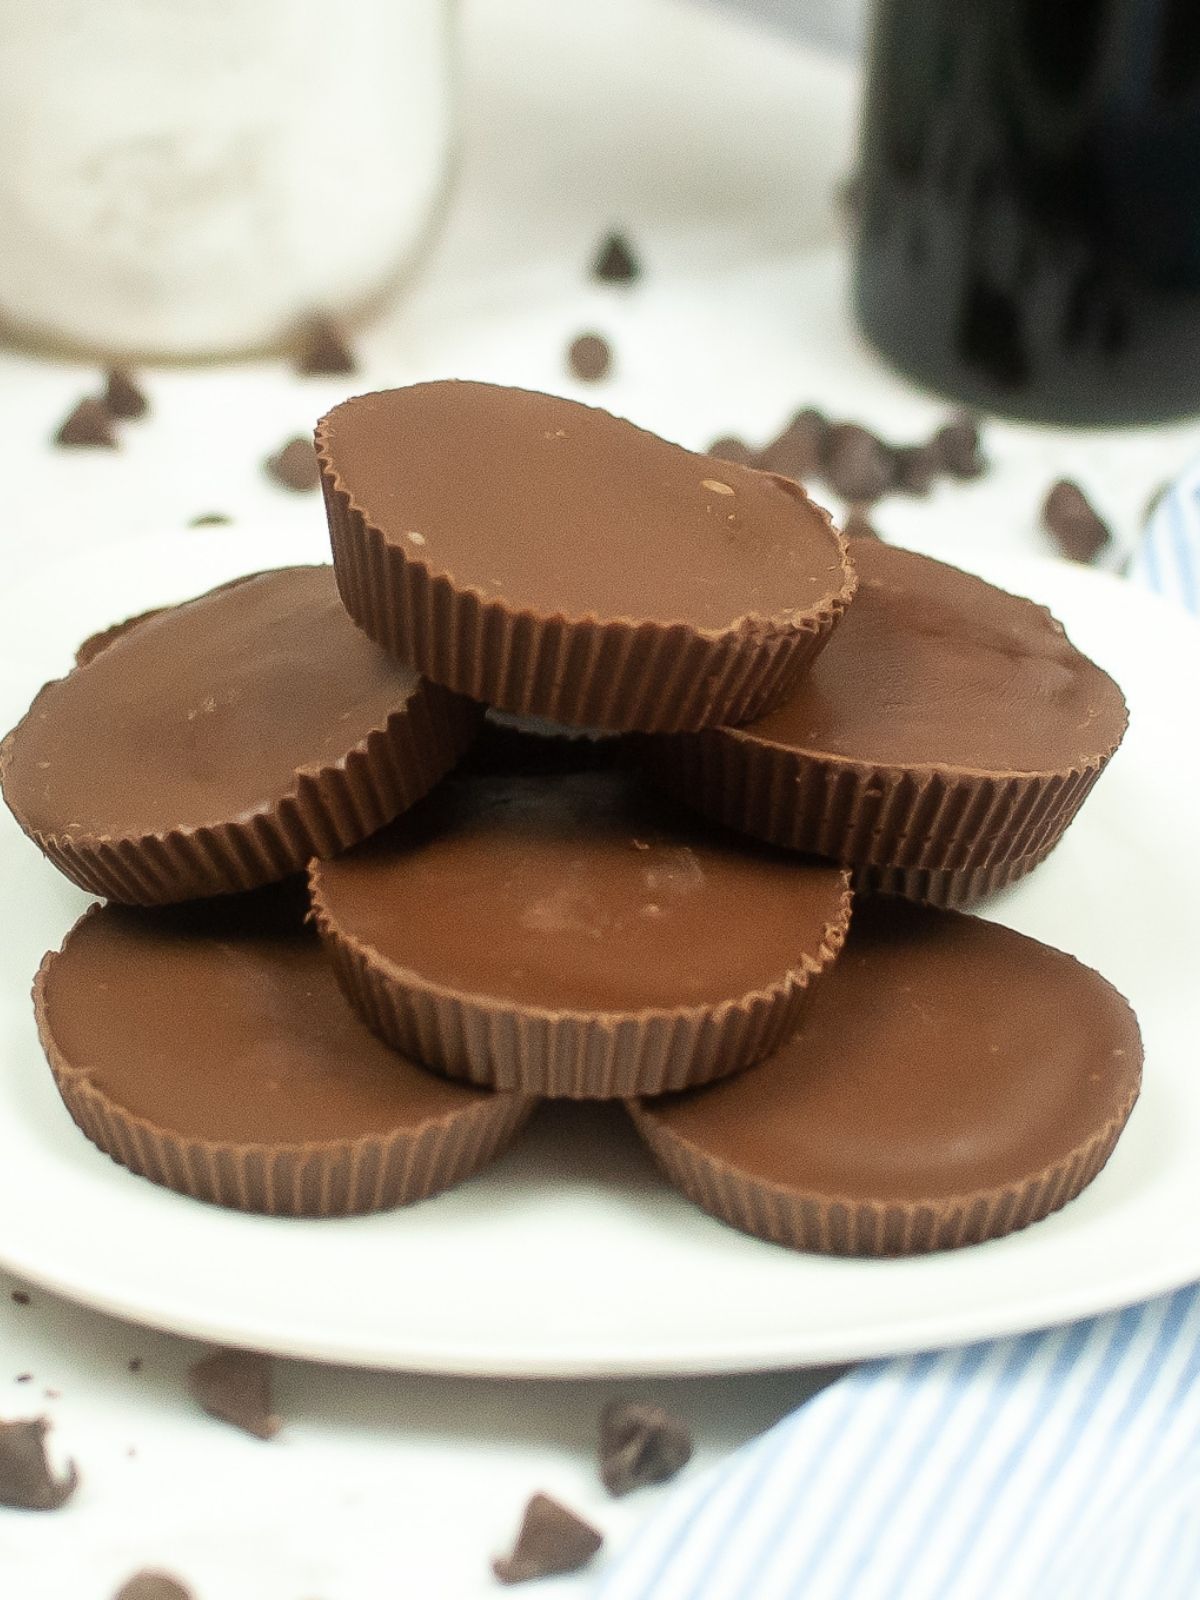 Reese's copycat peanut butter cups stacked on plate.